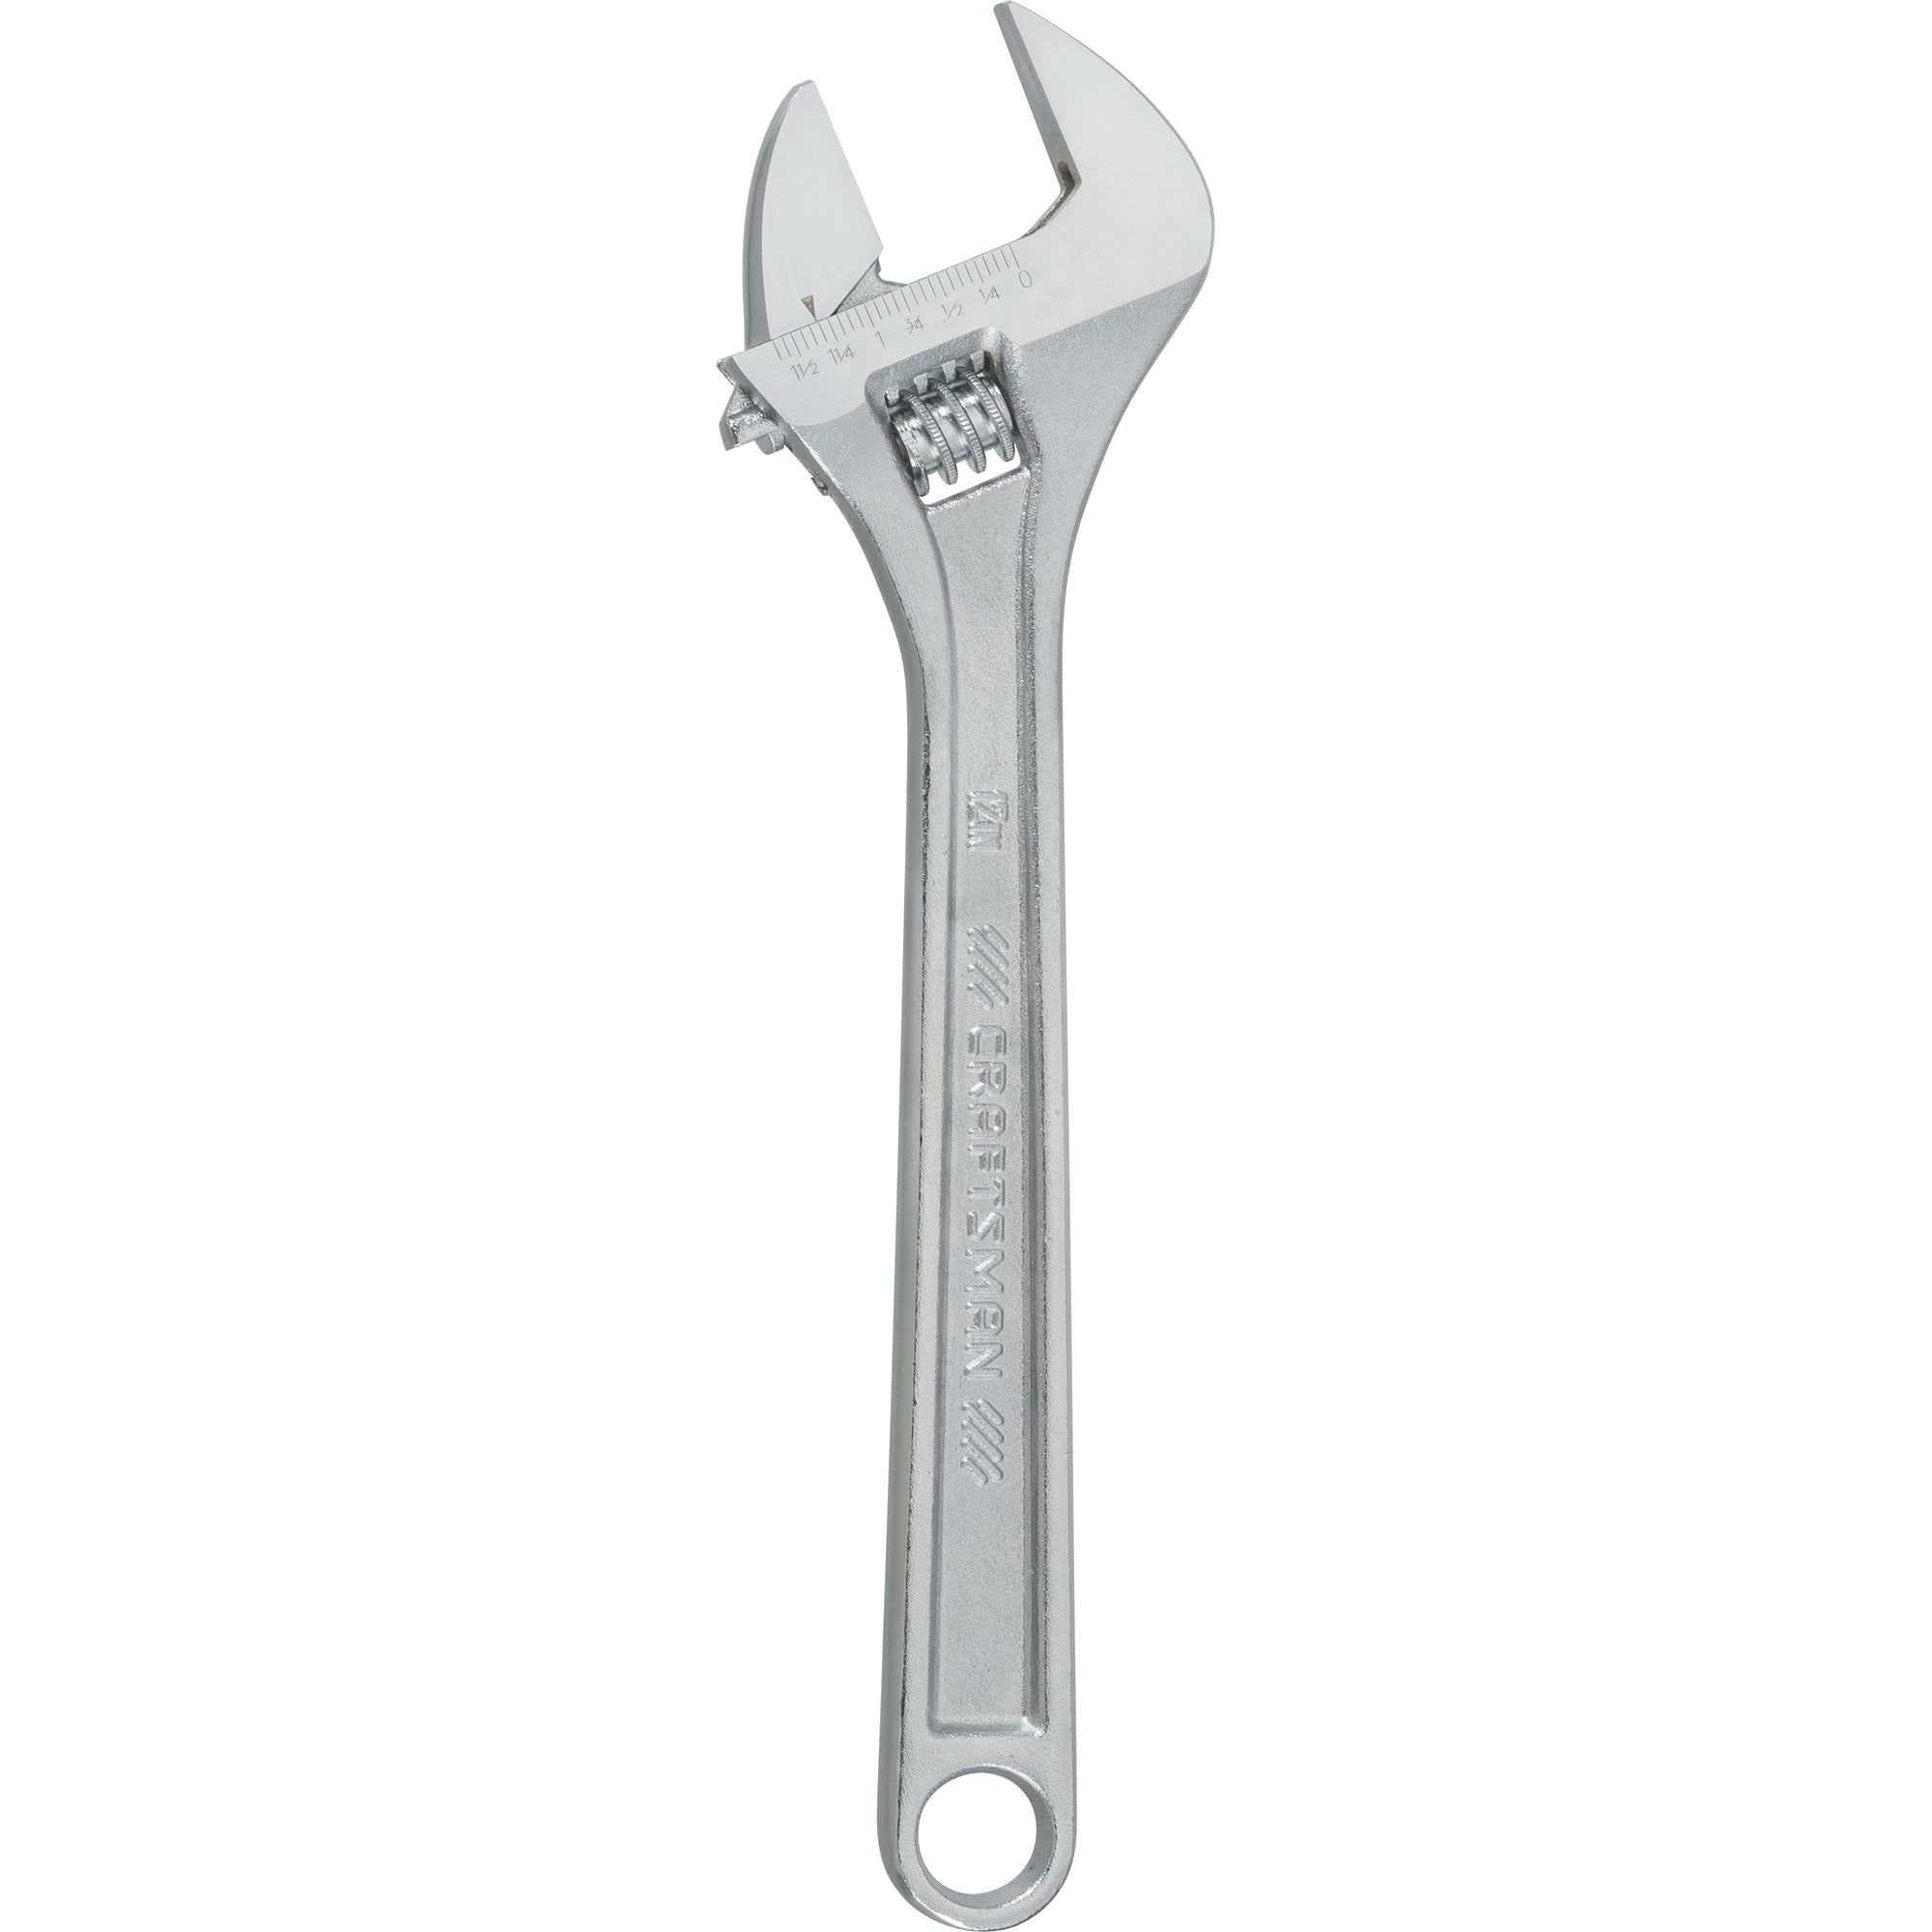 CLE A MOLETTE 12 / ADJUSTABLE WRENCH 12 - HADW131128 FP00341